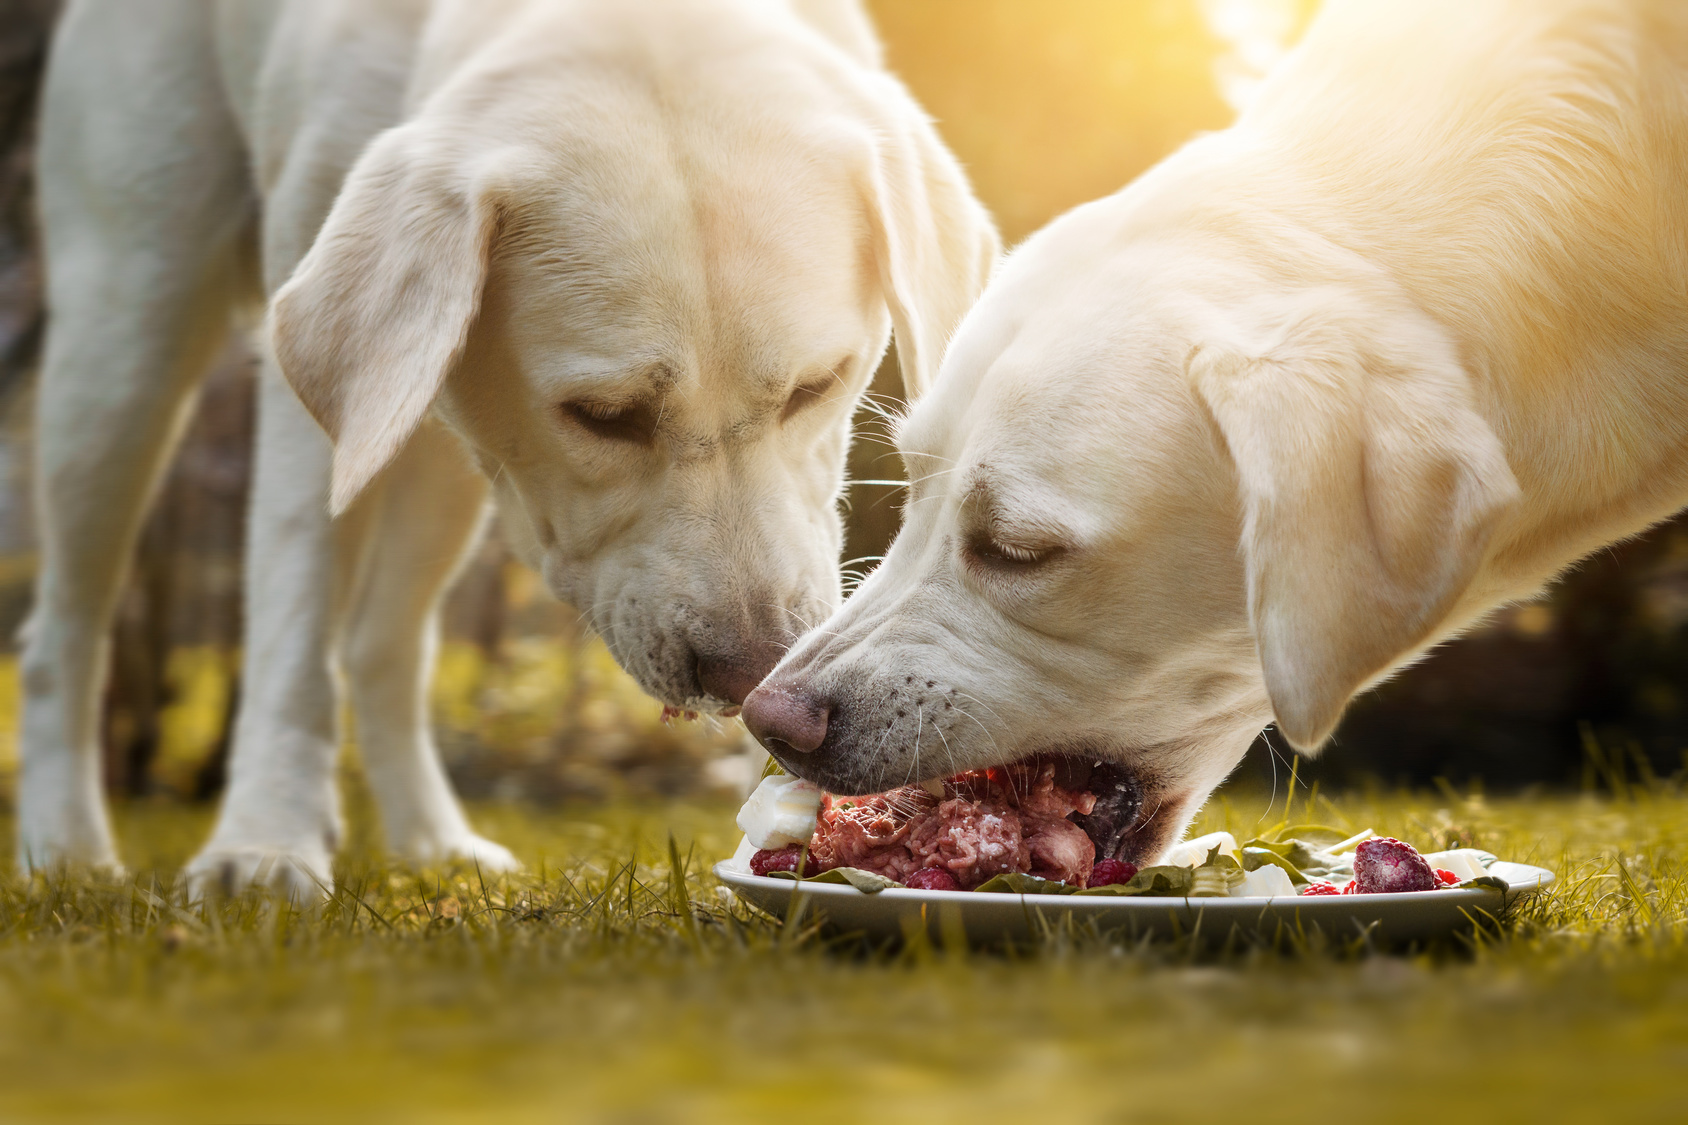 Two young labrador dogs eating raw food